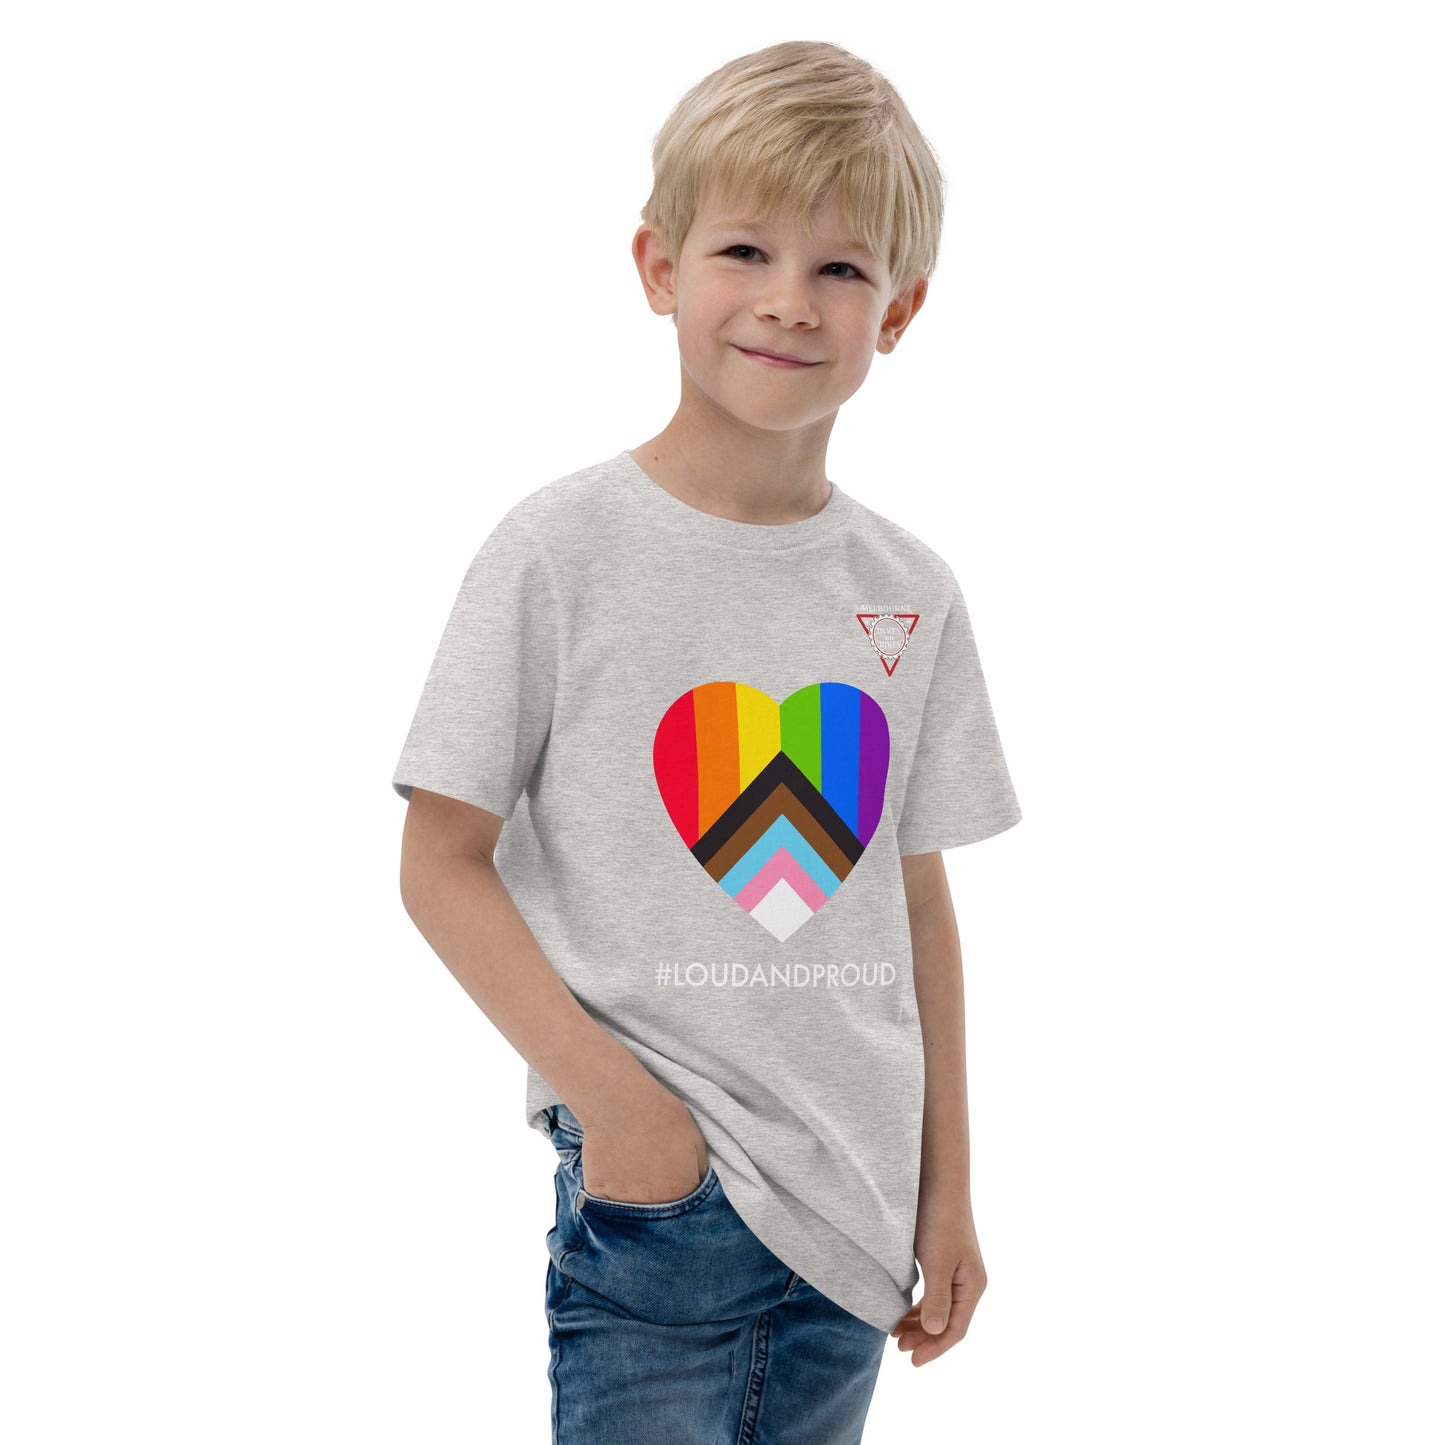 Youth jersey t-shirt - Loud and Proud Rainbow heart